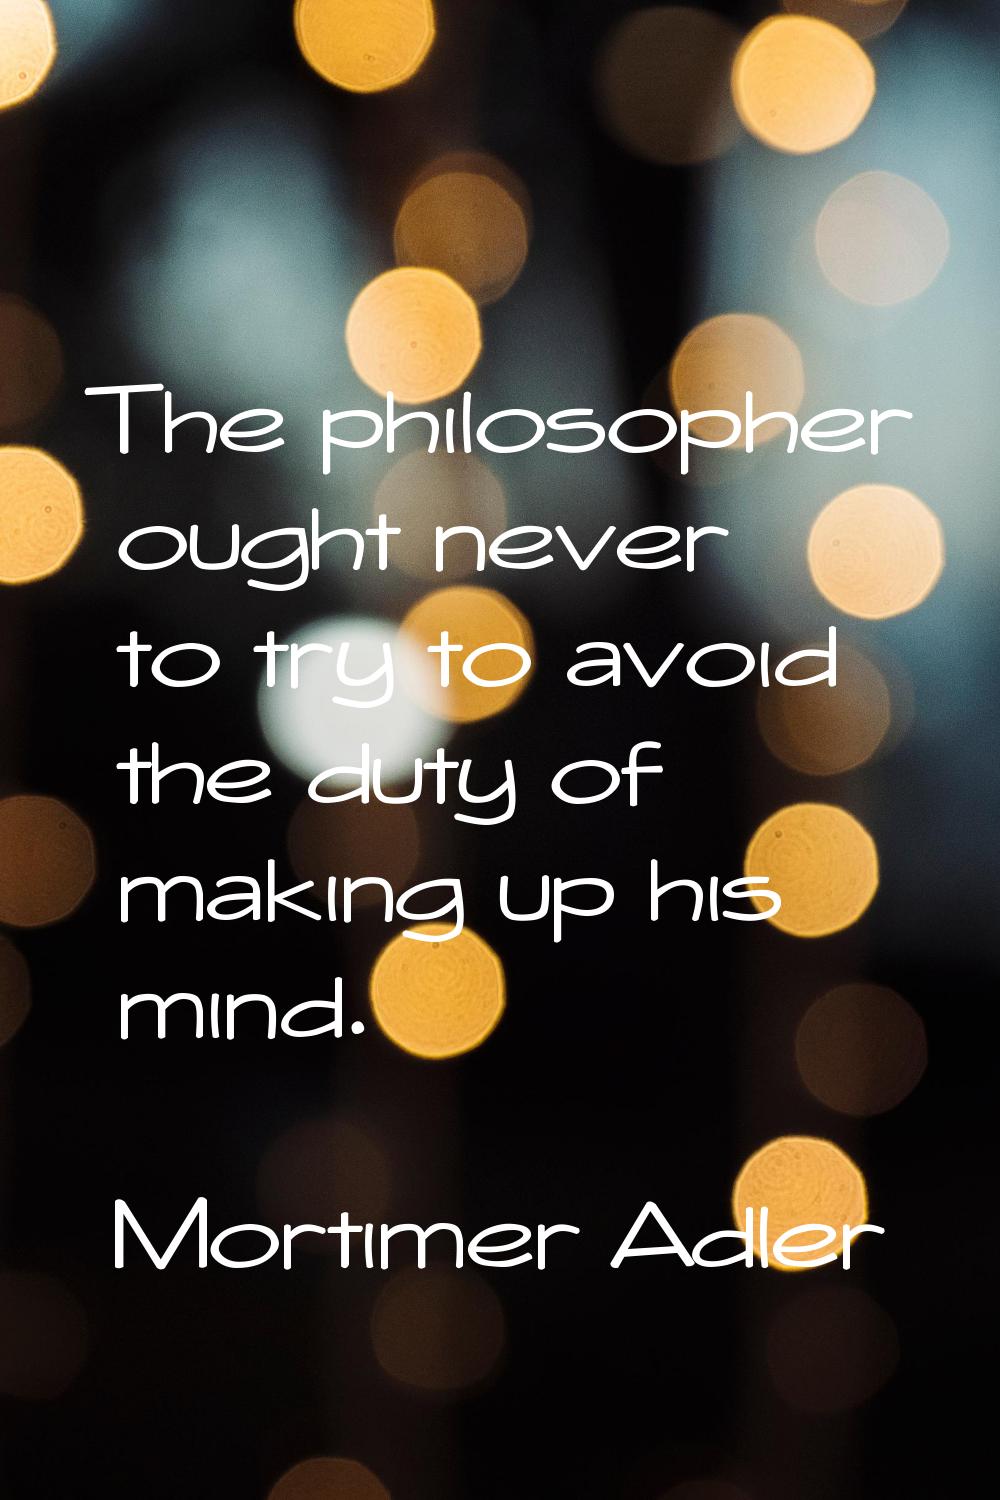 The philosopher ought never to try to avoid the duty of making up his mind.